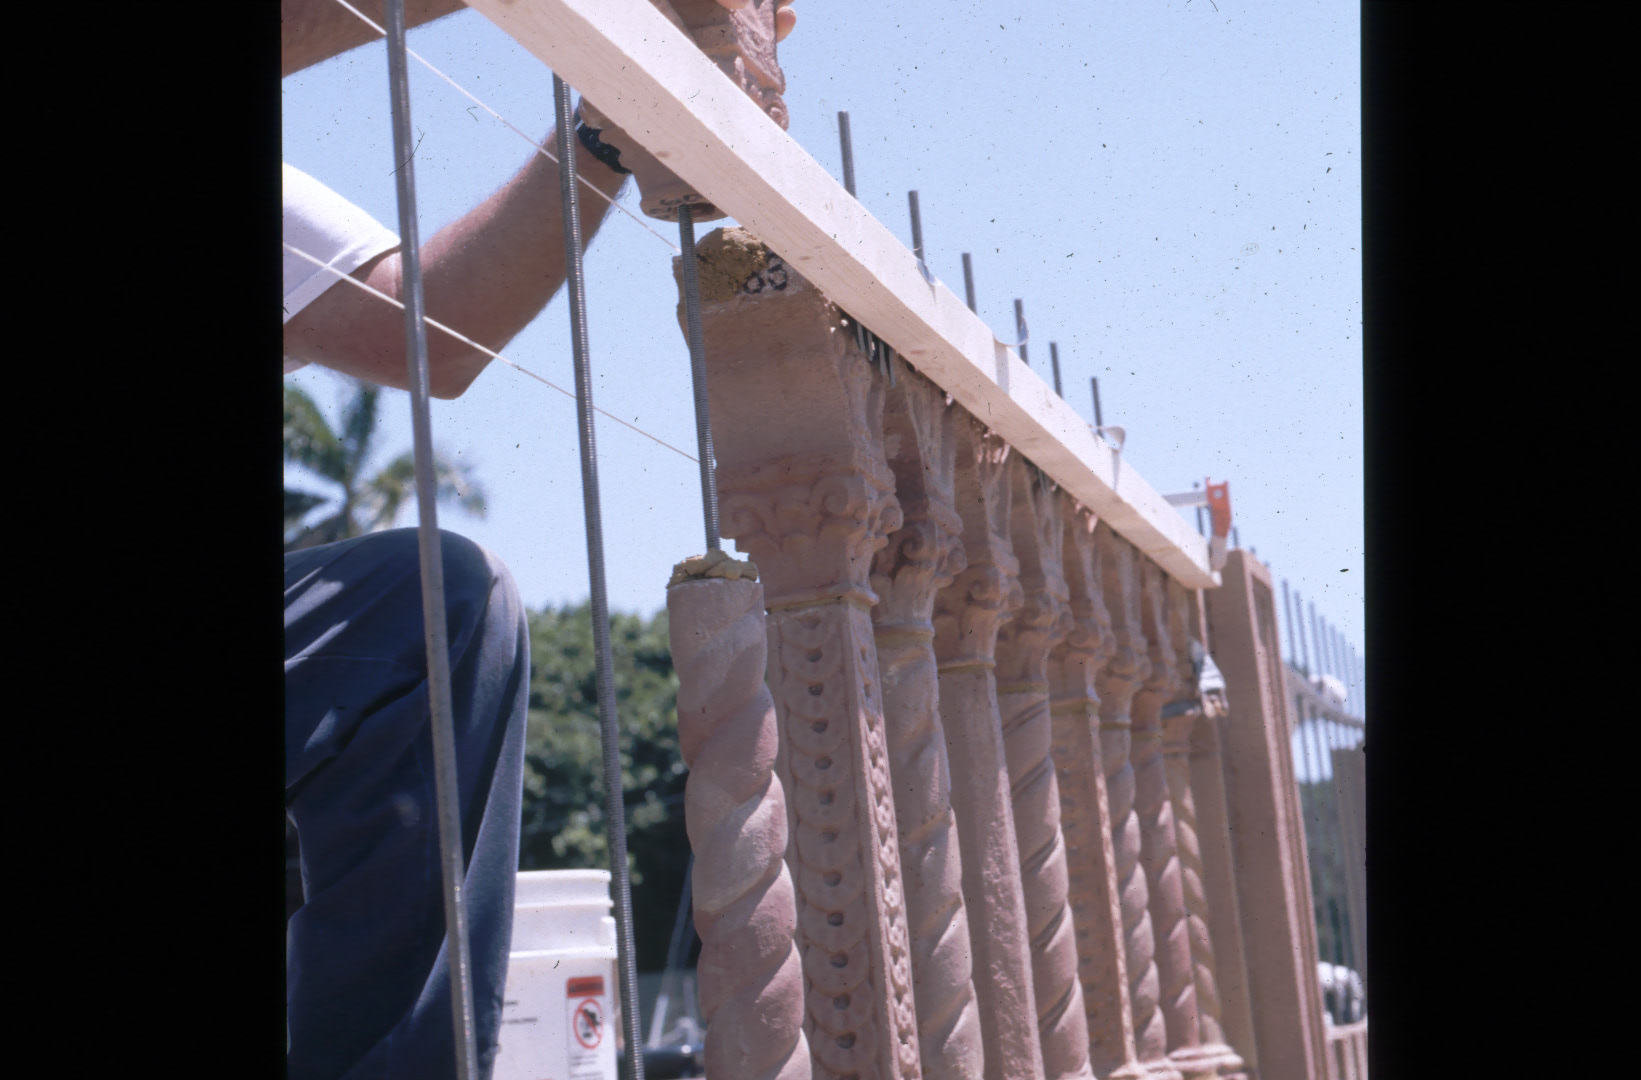 The terrace balustrade was replaced in 1992. With direct exposure to moisture from the bay, they require constant care.